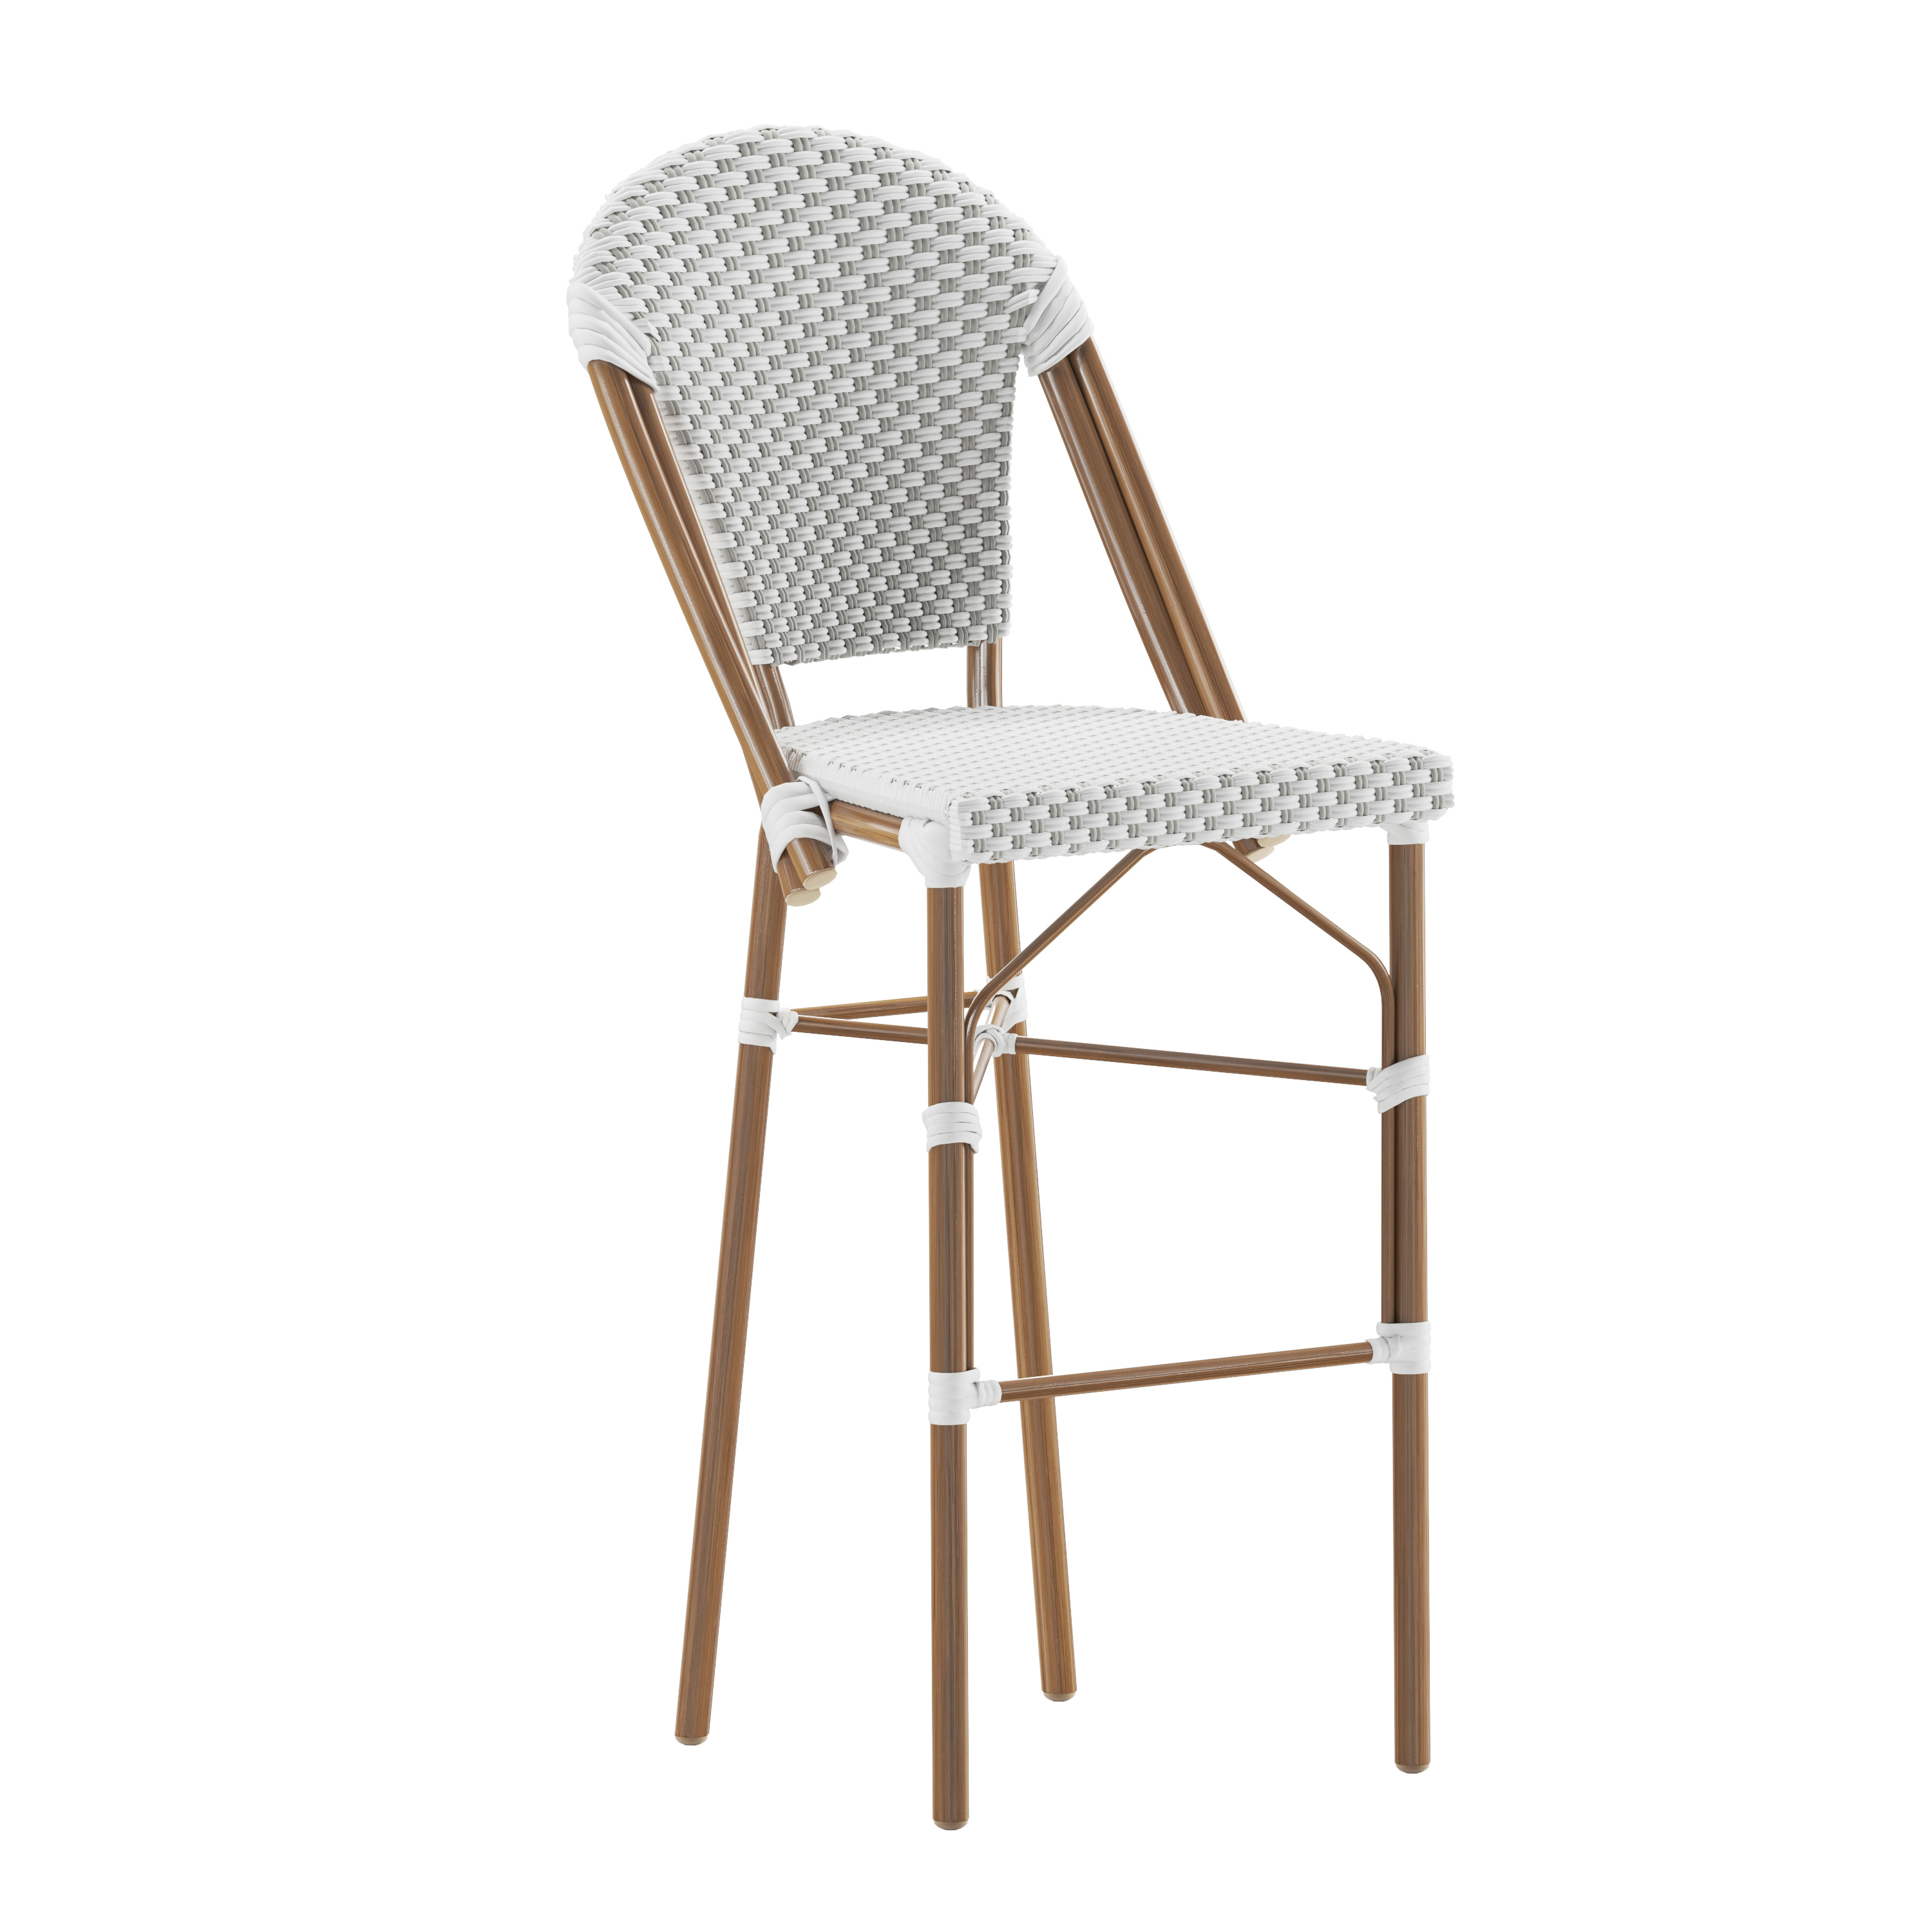 Flash Furniture SDA-AD642001-F-BS-WHGY-NAT-GG Indoor/Outdoor French Bistro 30" Barstool, White/Gray and Bamboo Finish